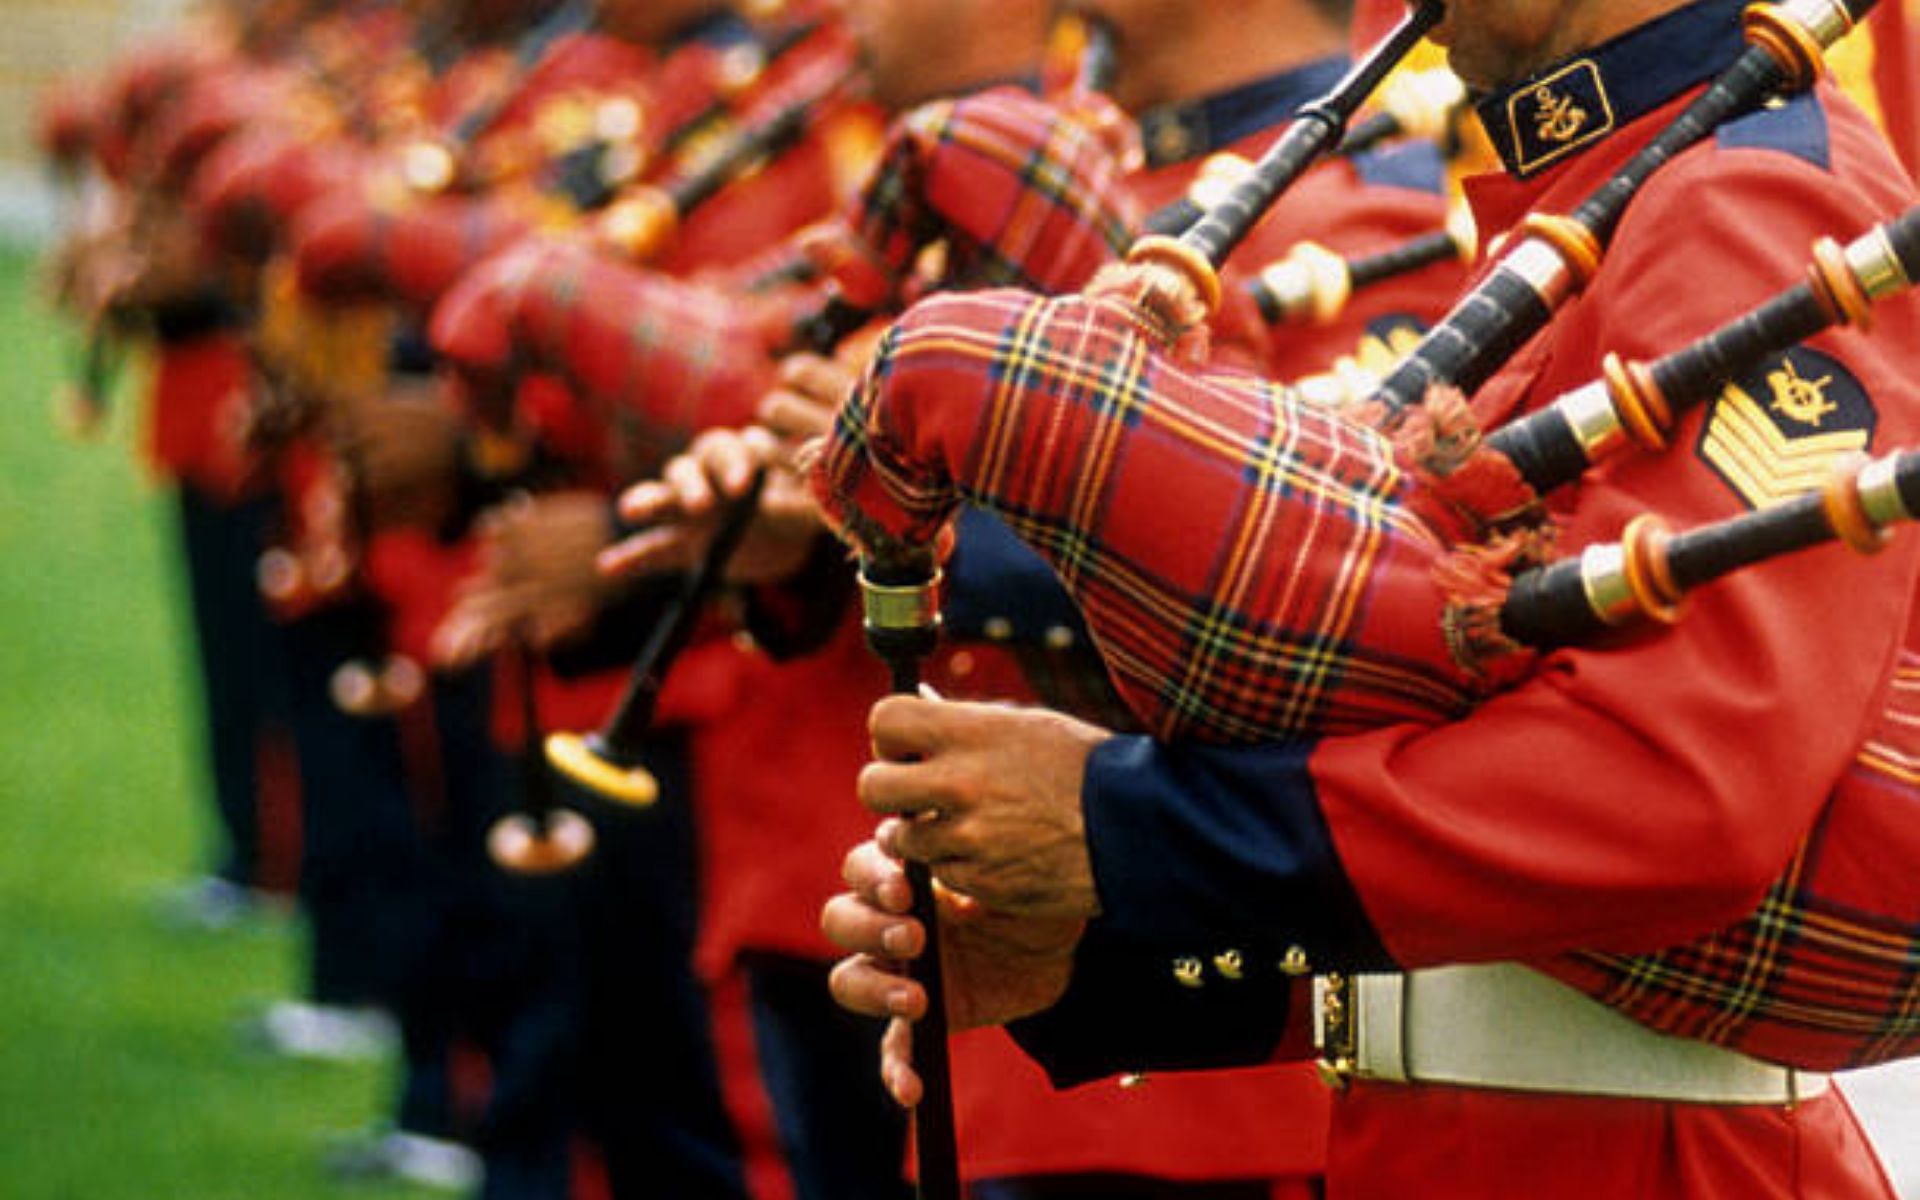 Bagpipe Performance as a graduate degree program (Image via Getty Images)